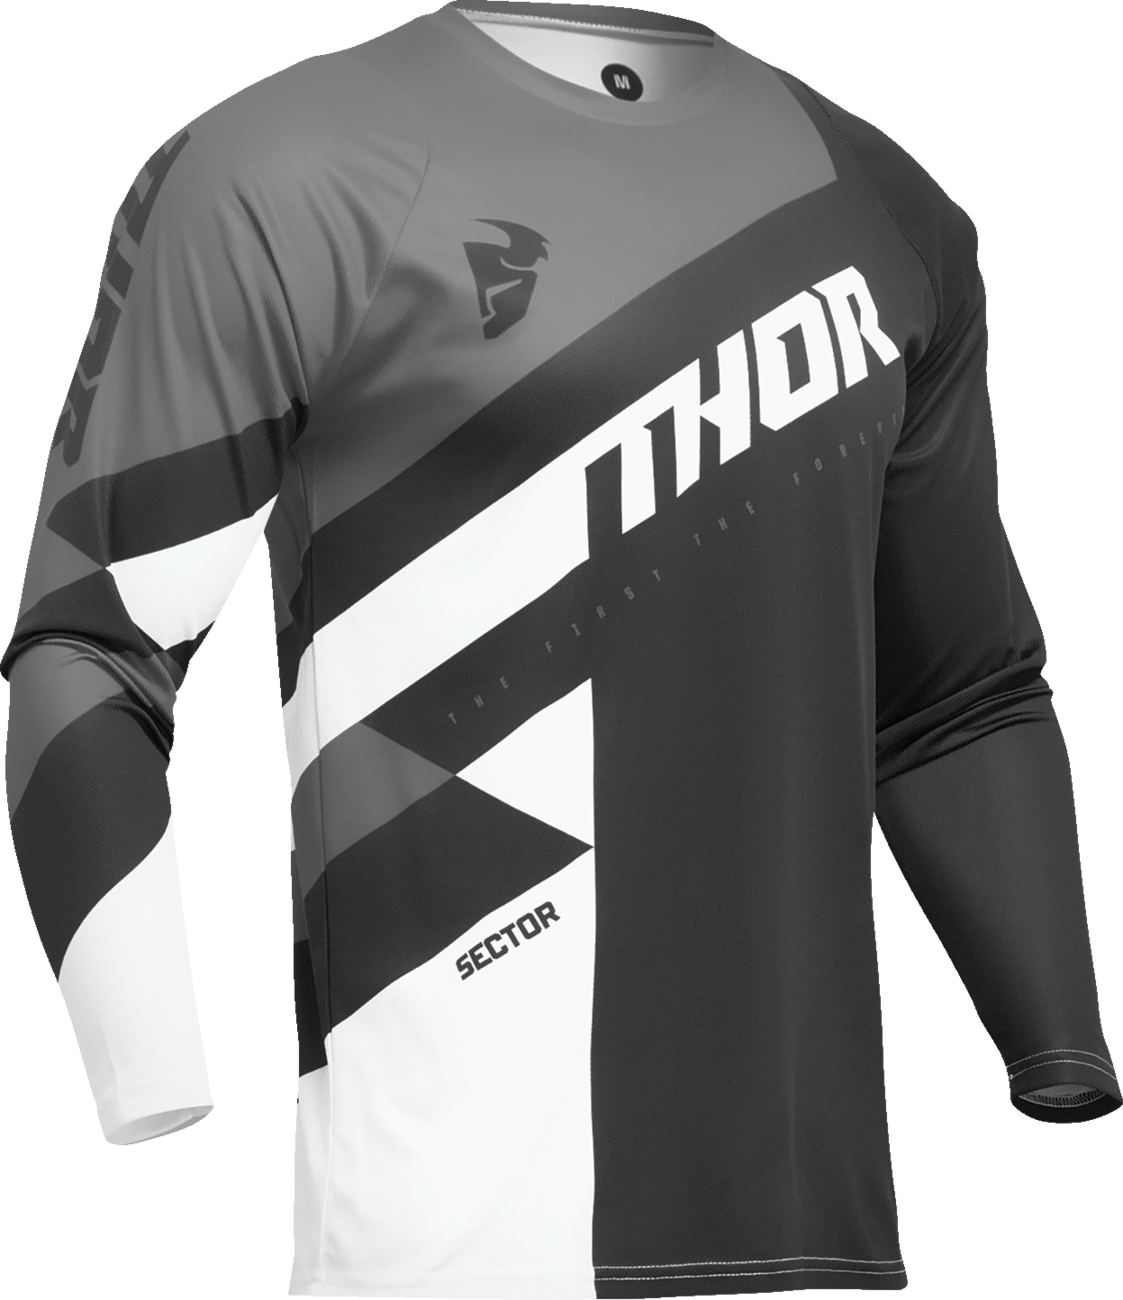 THOR Youth Sector Checker Jersey - Black/Gray - Large 2912-2410